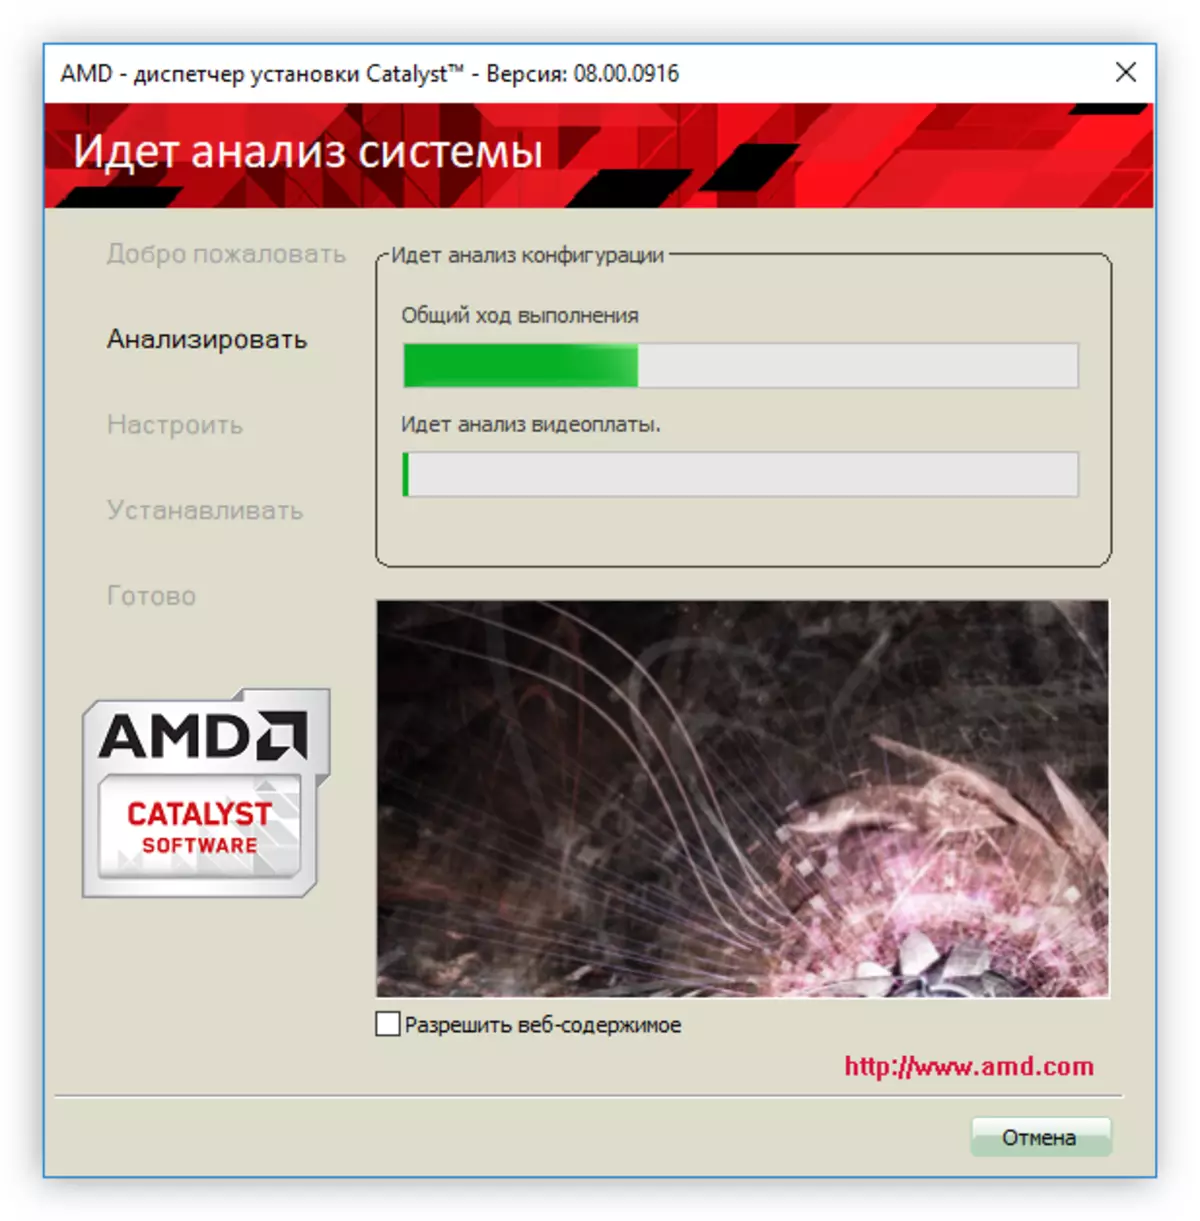 Analysis of the system when installing the driver for AMD Radeon HD 7640G